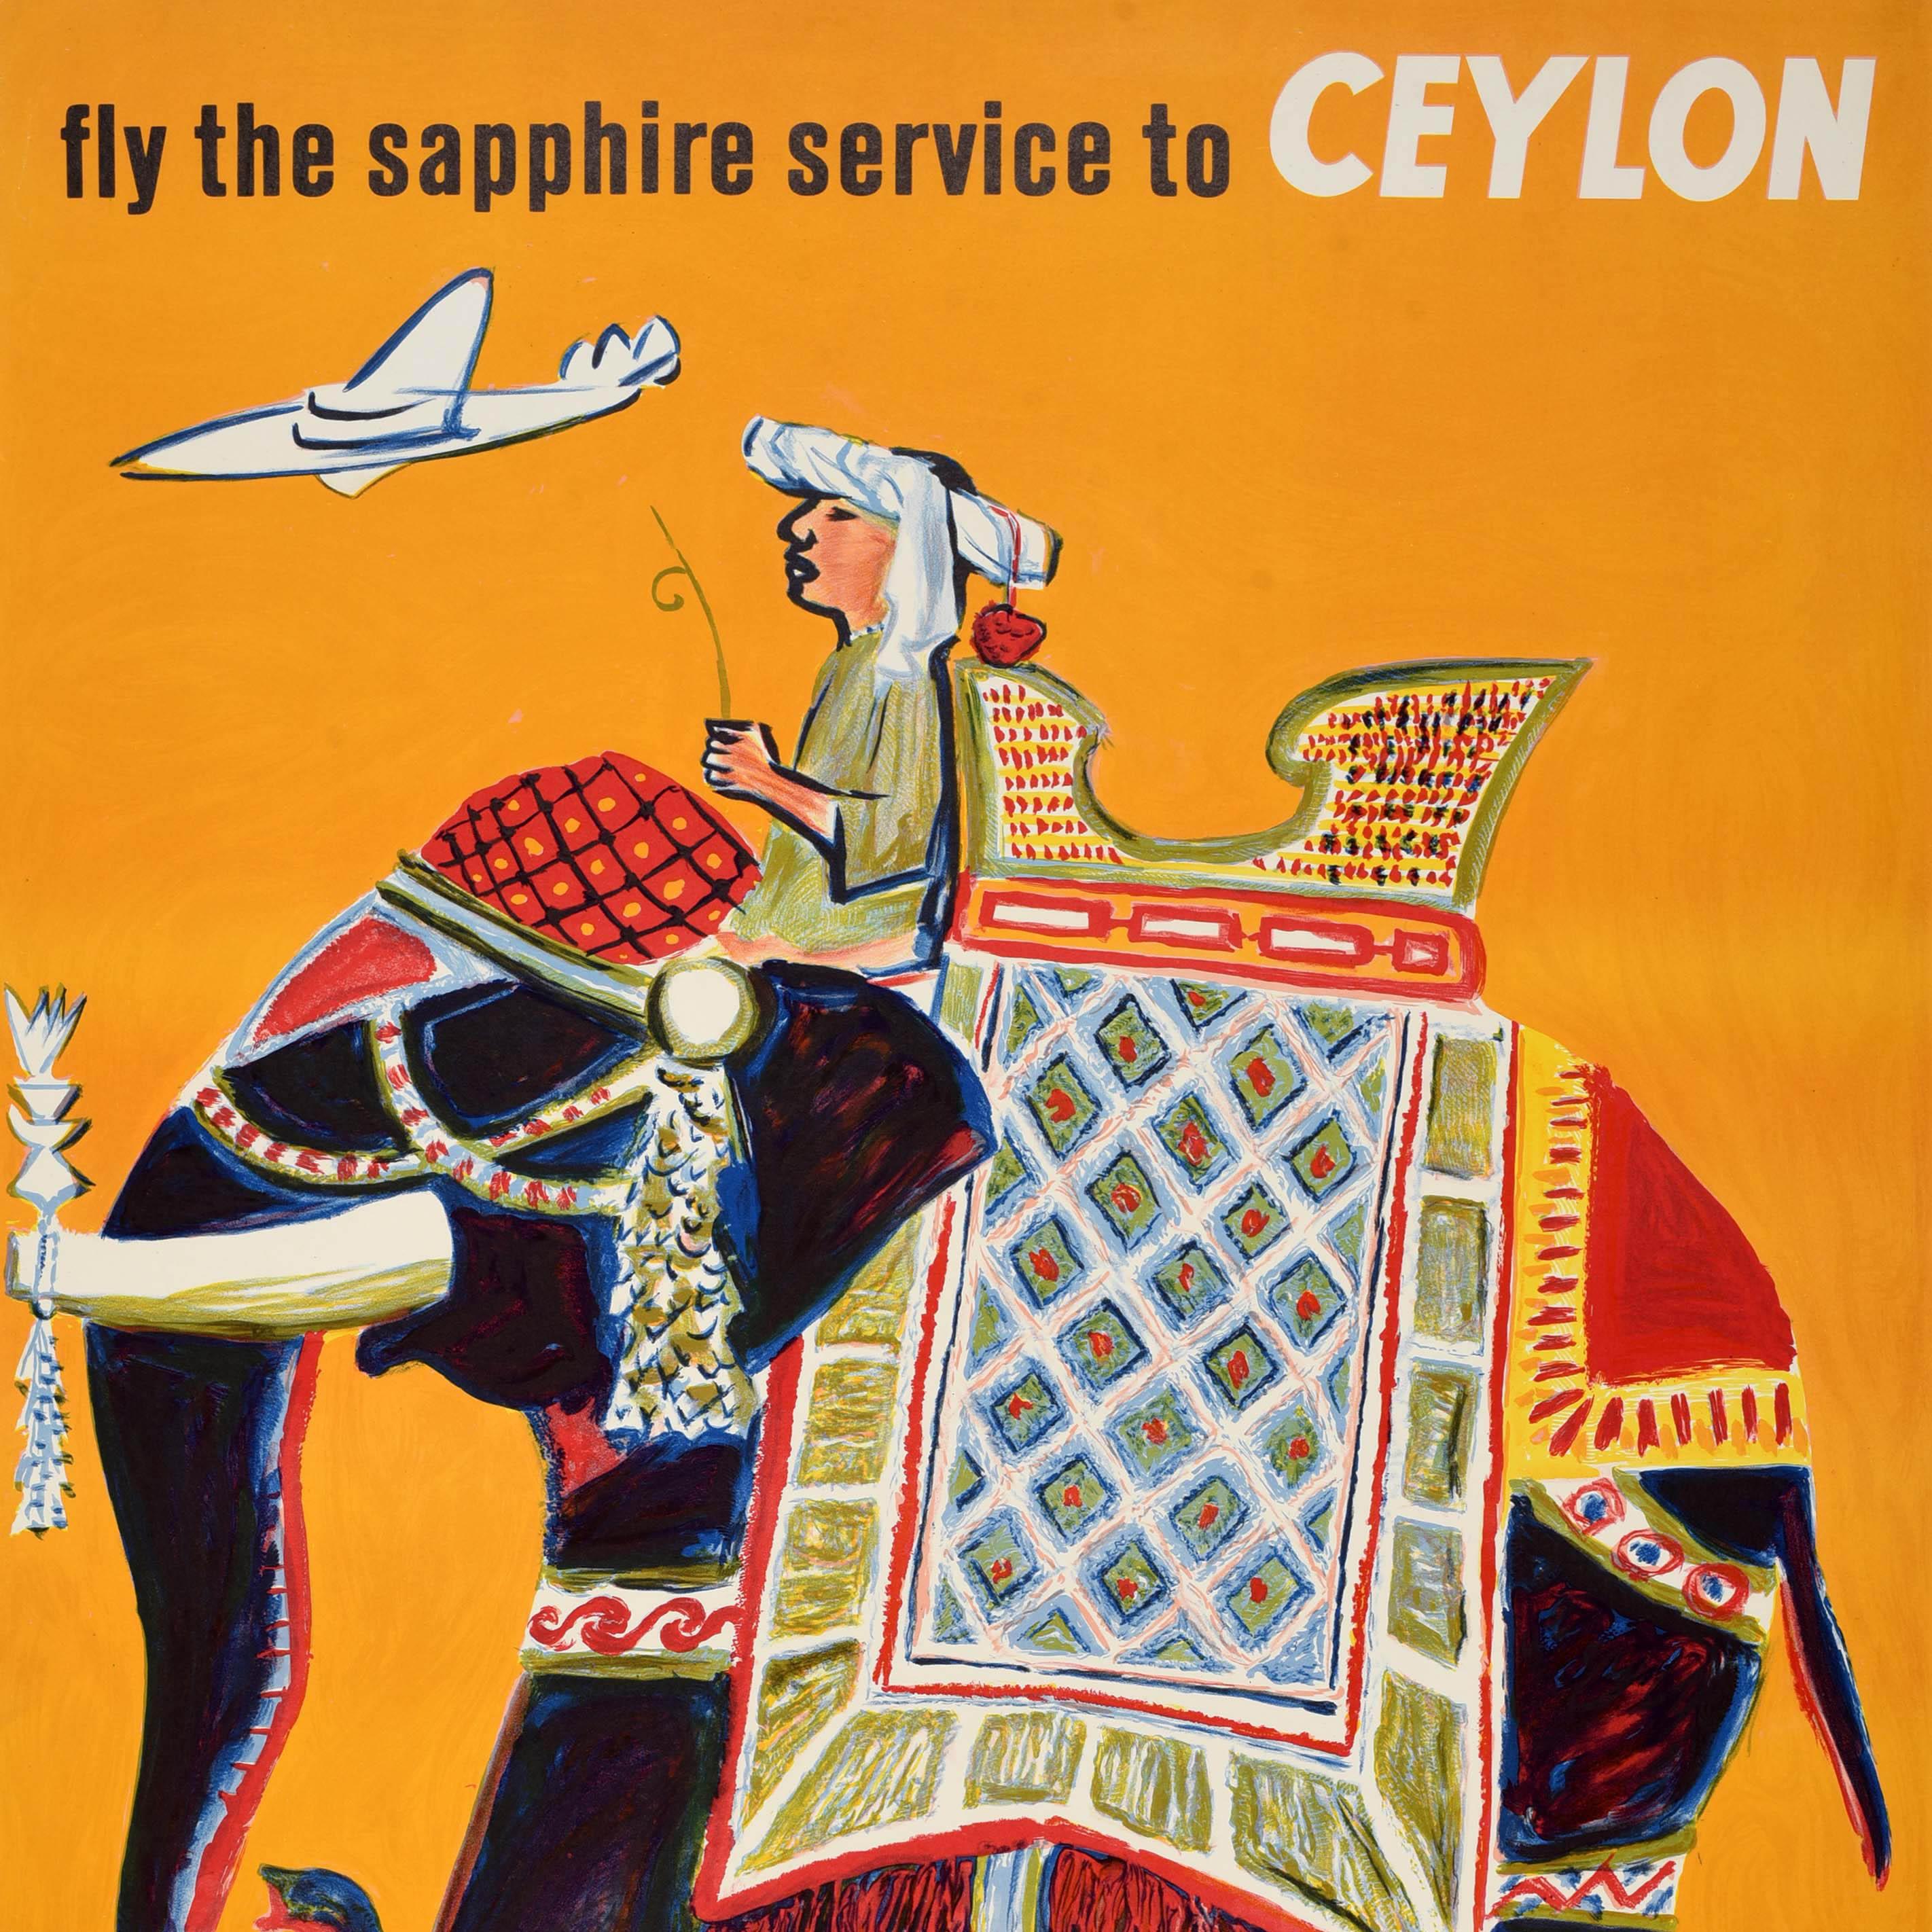 Original vintage Asia travel poster issued by Air Ceylon - Fly the Sapphire Service to Ceylon - featuring artwork by Mart Kempers (1924-1993) of a man riding an elephant decorated in colourful fabric with a seat on its back on a yellow background, a